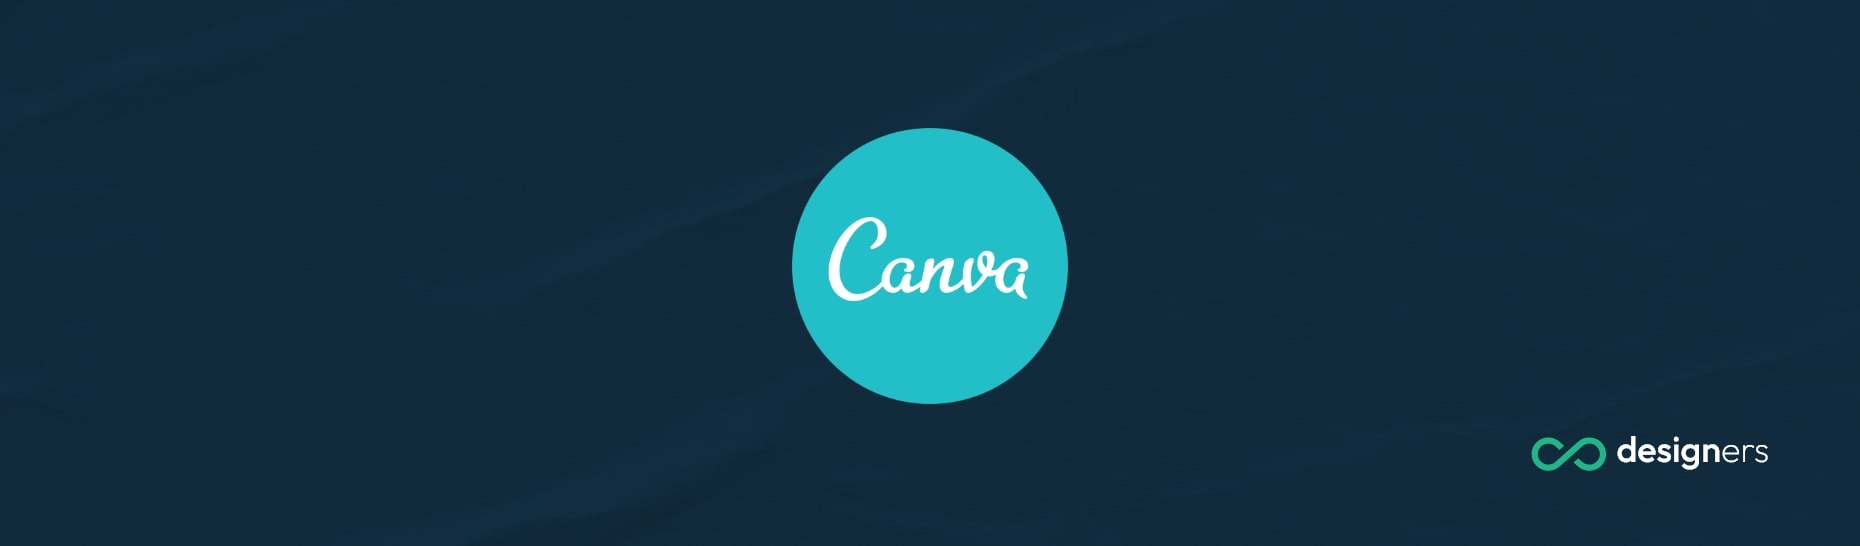 How Do I Change the Background Color in Canva?